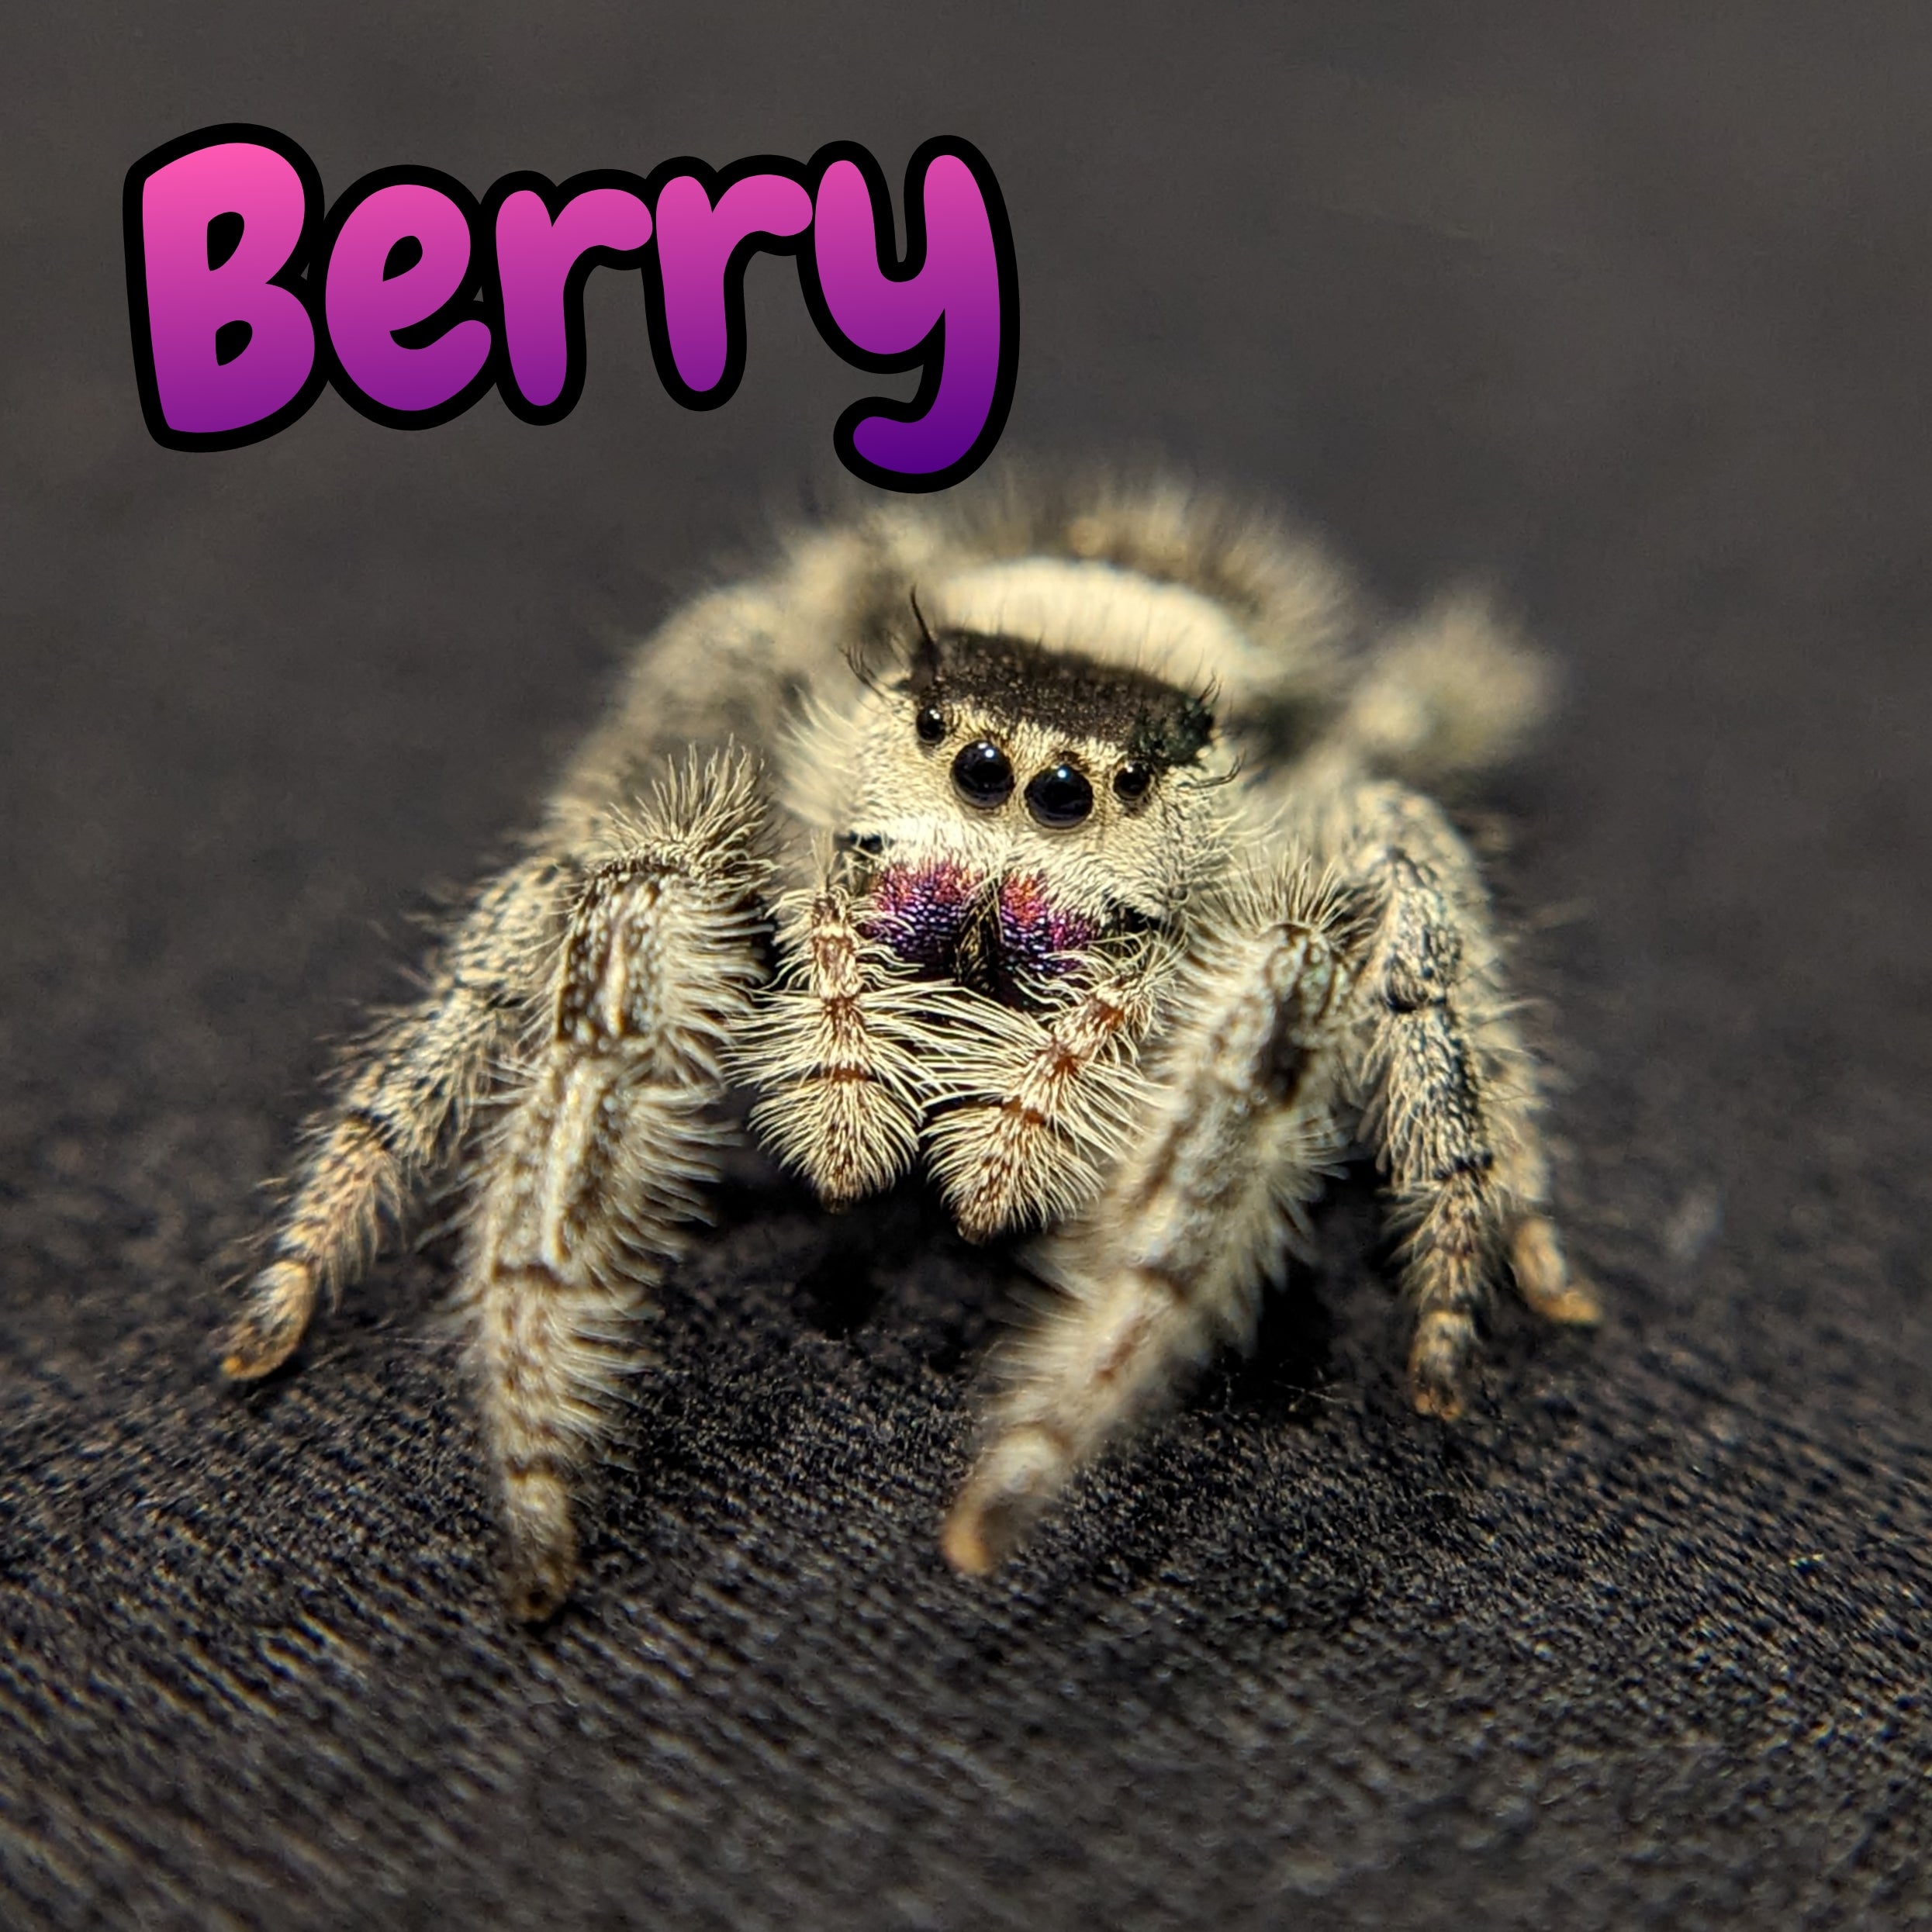 Apalachicola Regal Jumping Spider "Berry"